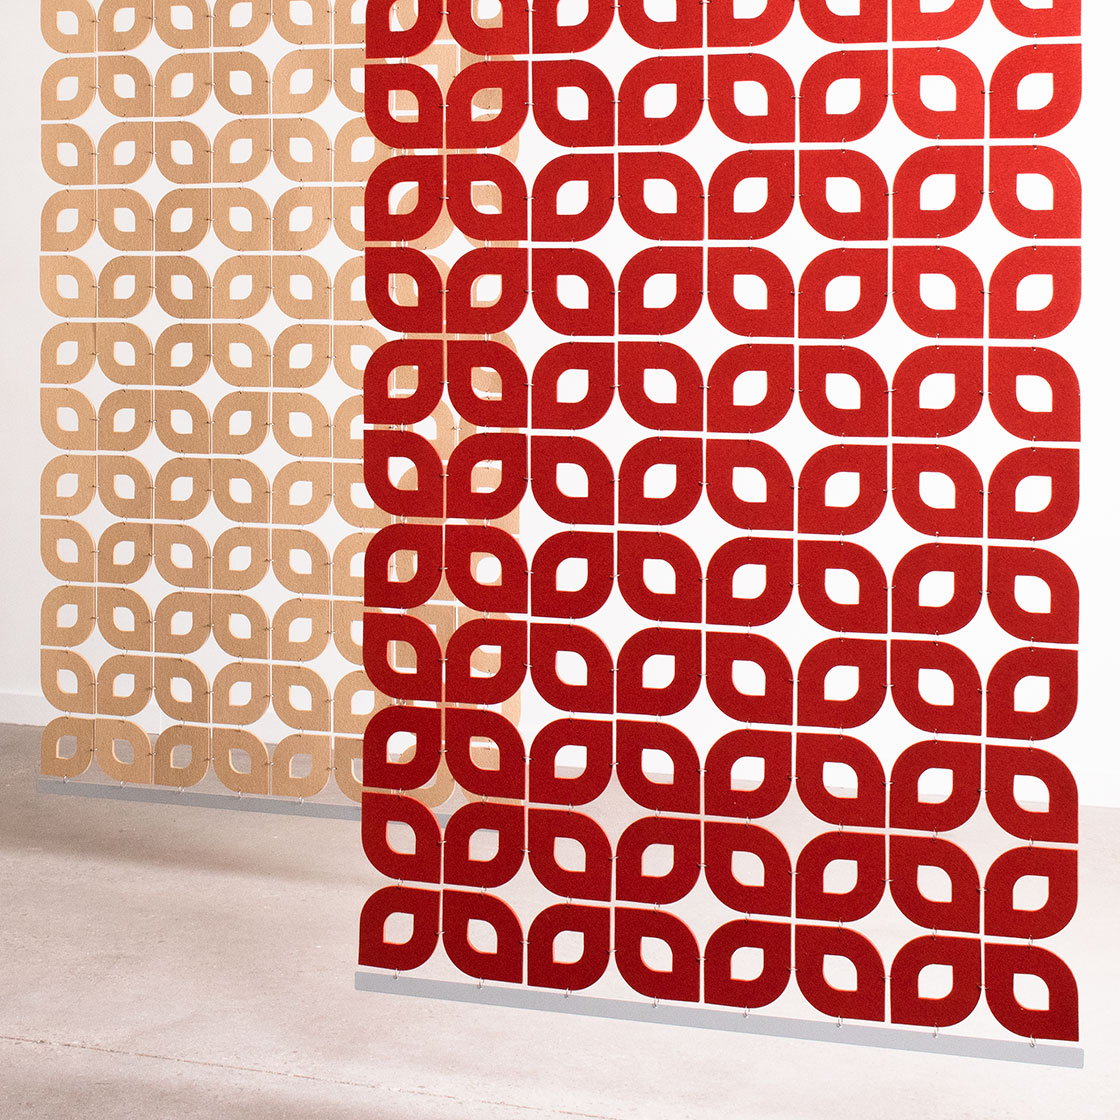 One tan and one red felt screen in an open petal shaped pattern hang in a white space.